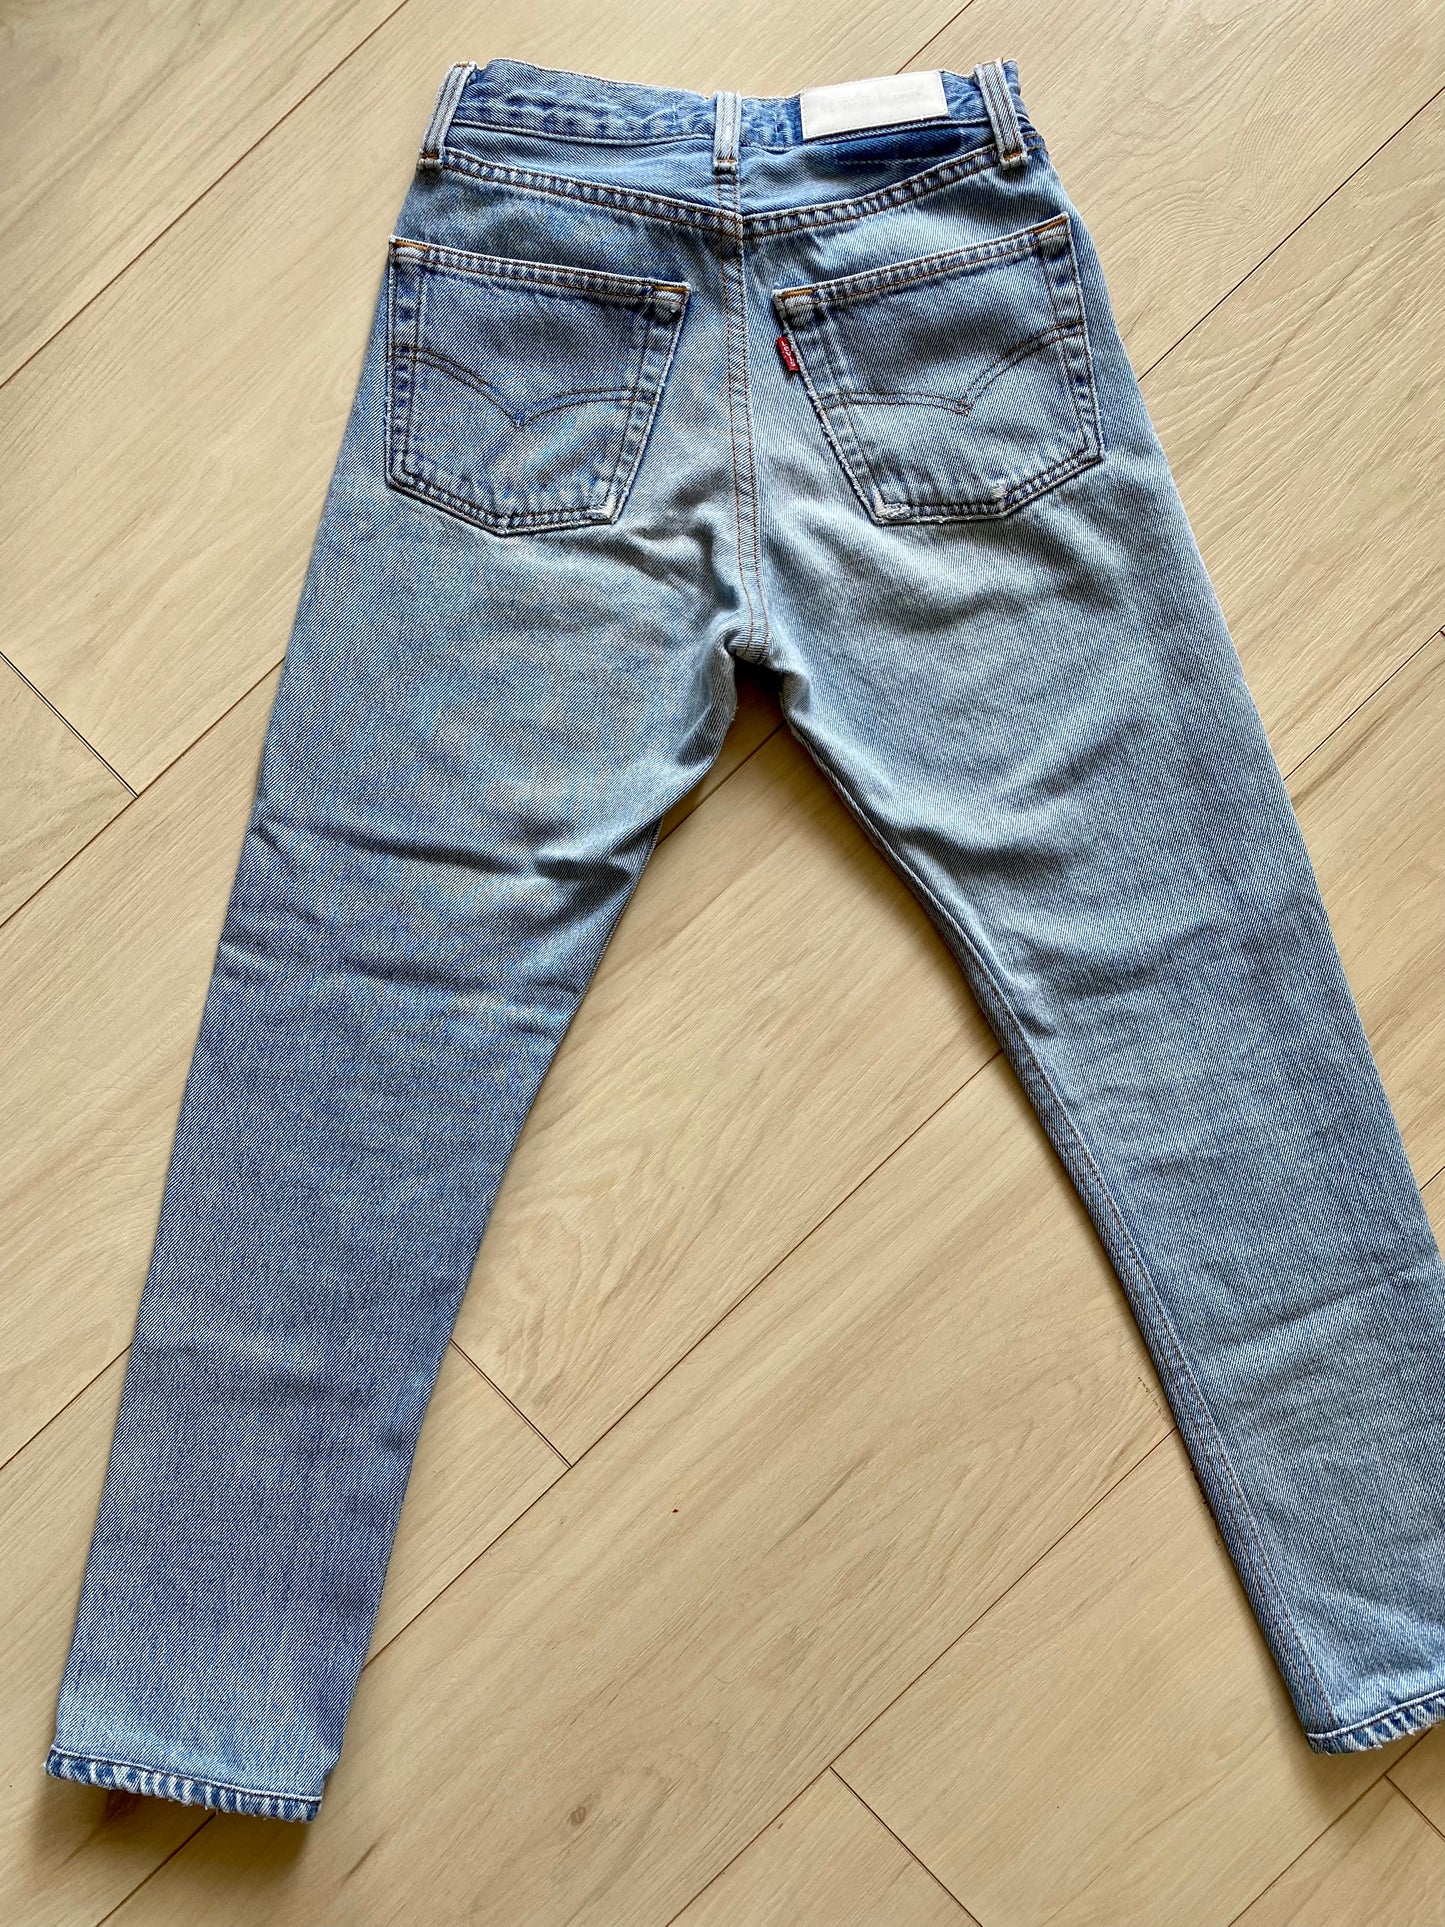 Size 24 Levi’s by RE/DONE